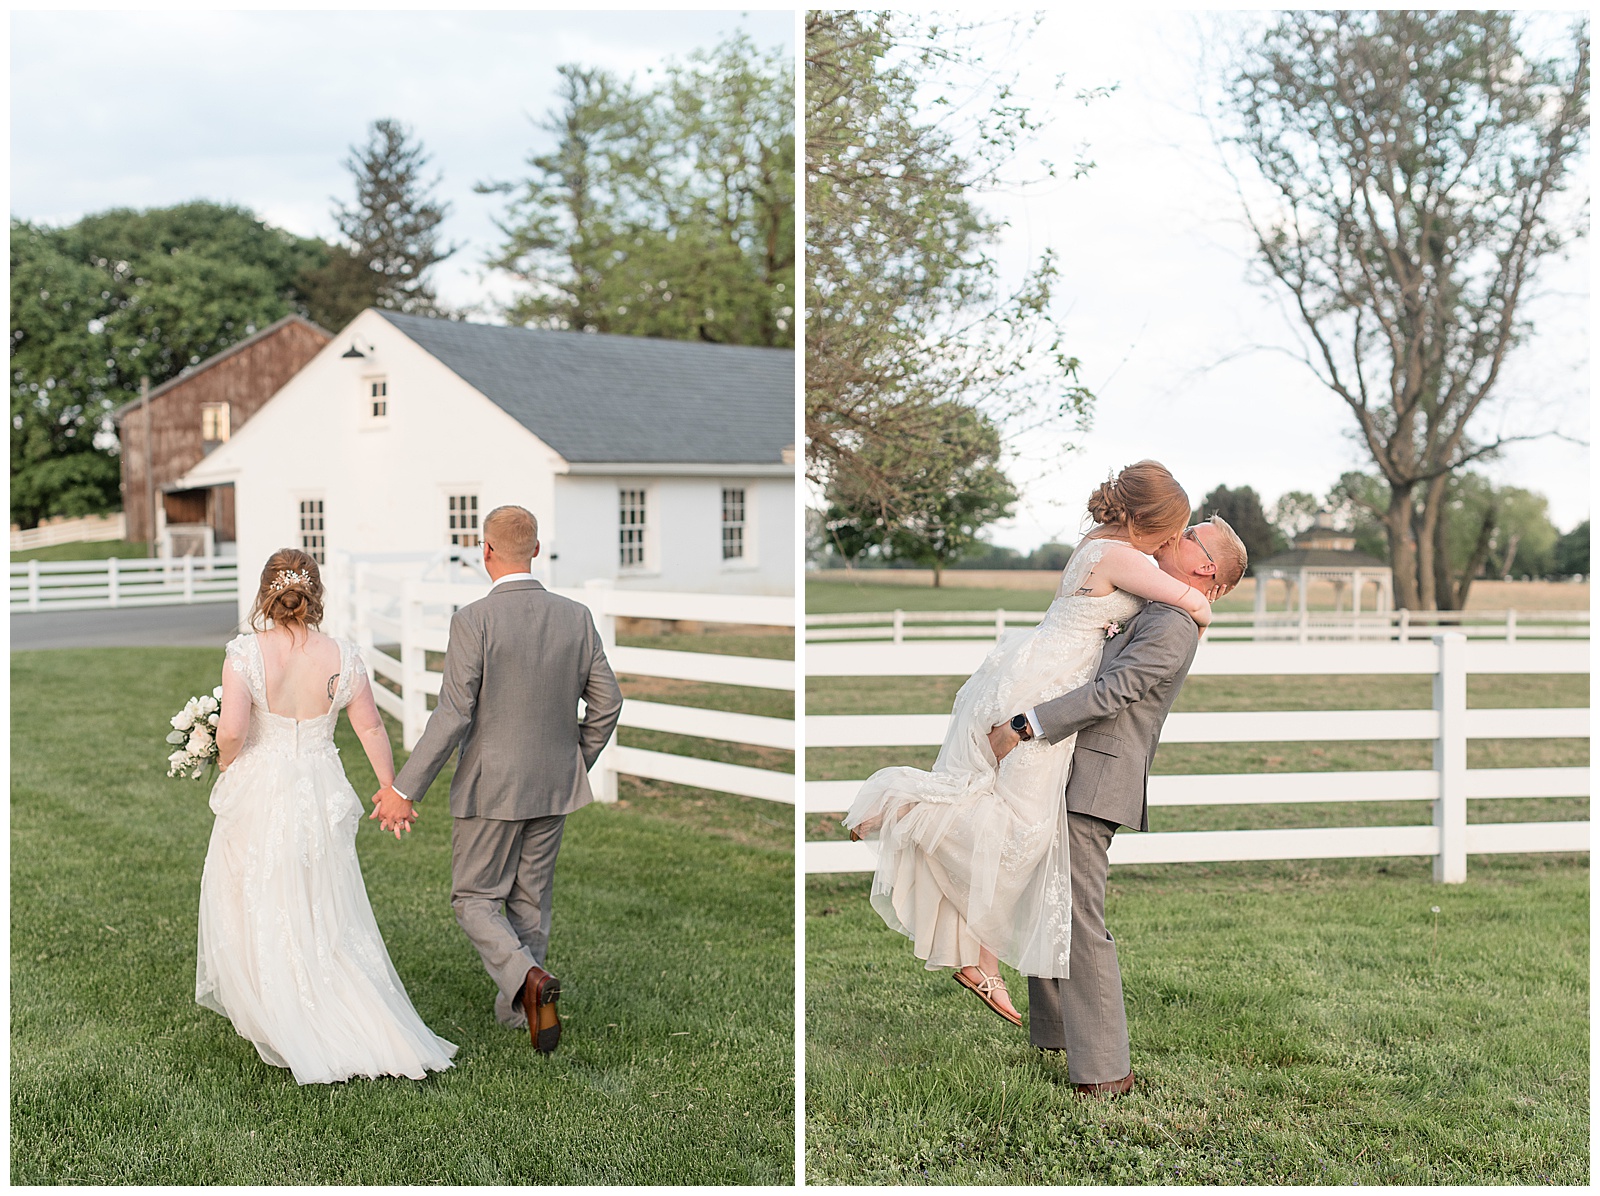 groom lifts bride off the ground in grass meadow by white fence